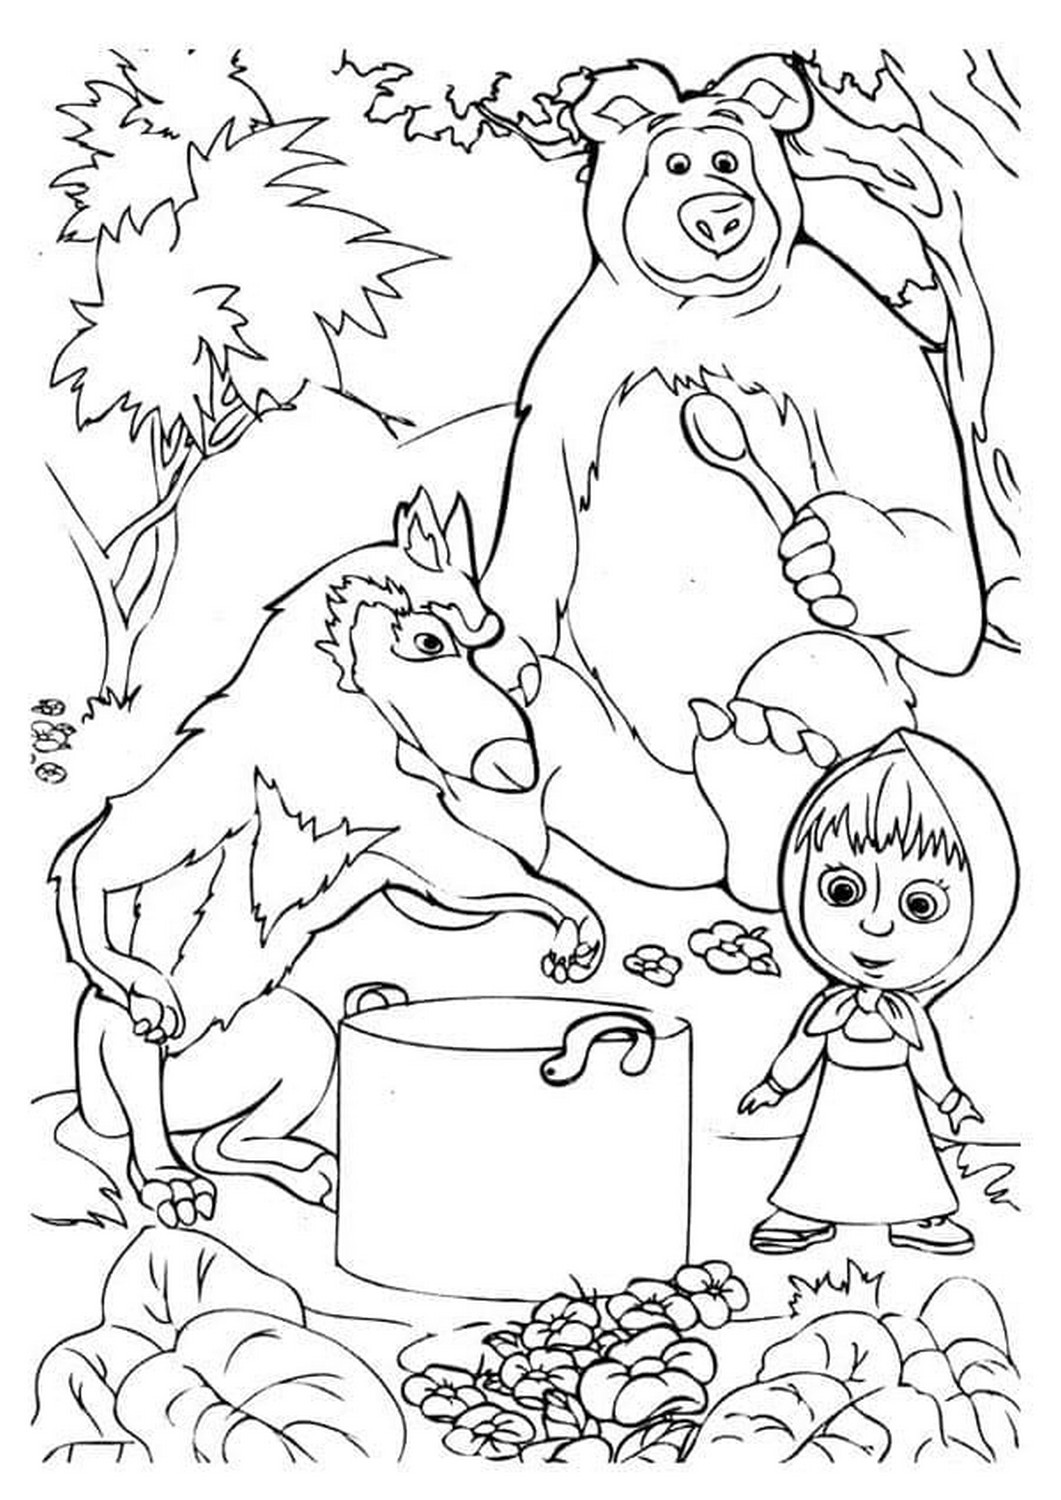 Masha and the Bear 51 drawing from Masha and the Bear to print and color